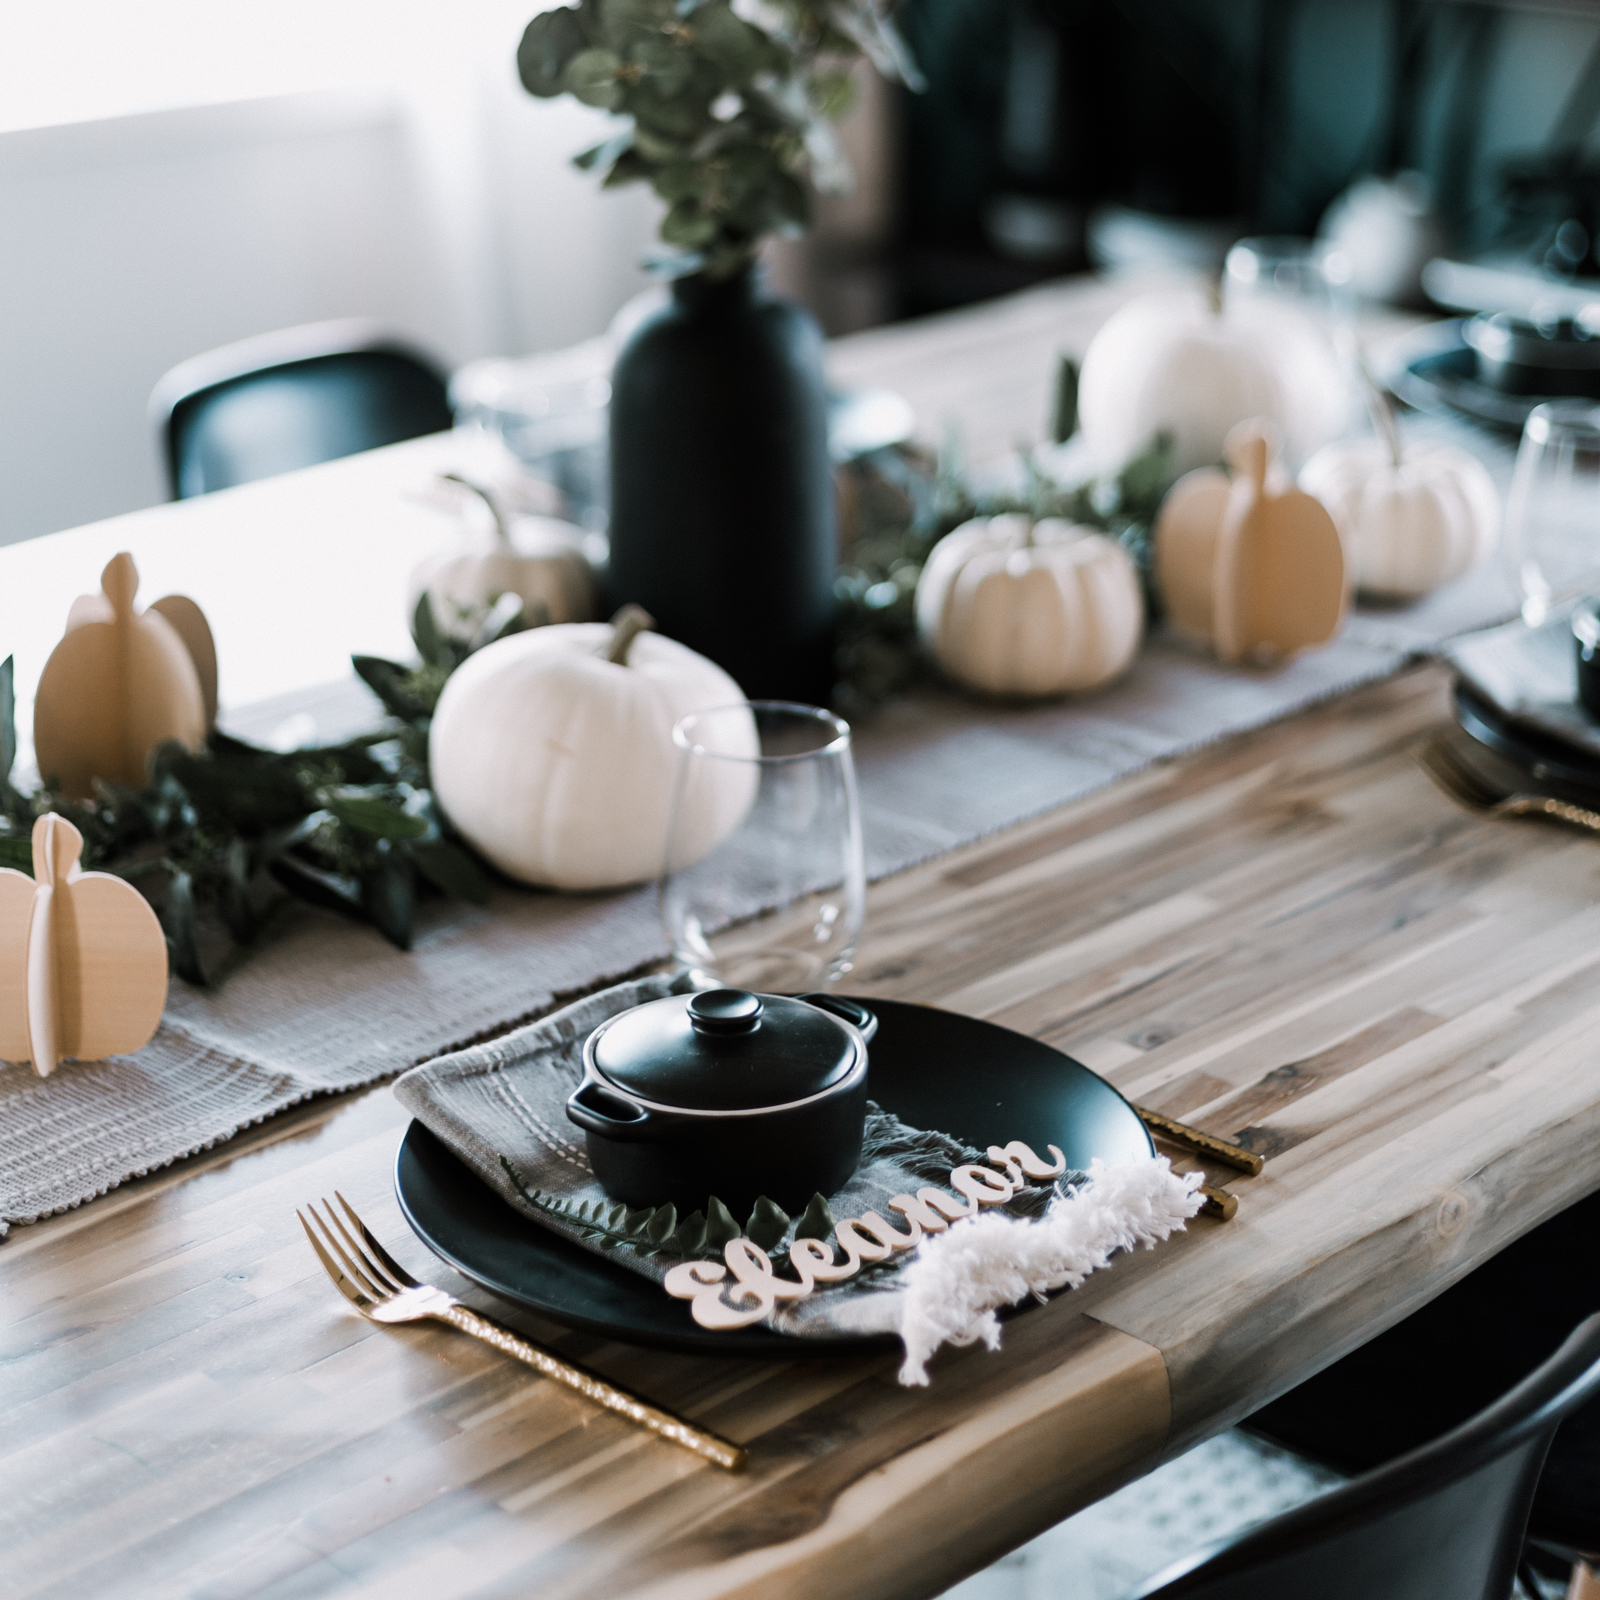 Tablescape with wood projects made on the Cricut maker